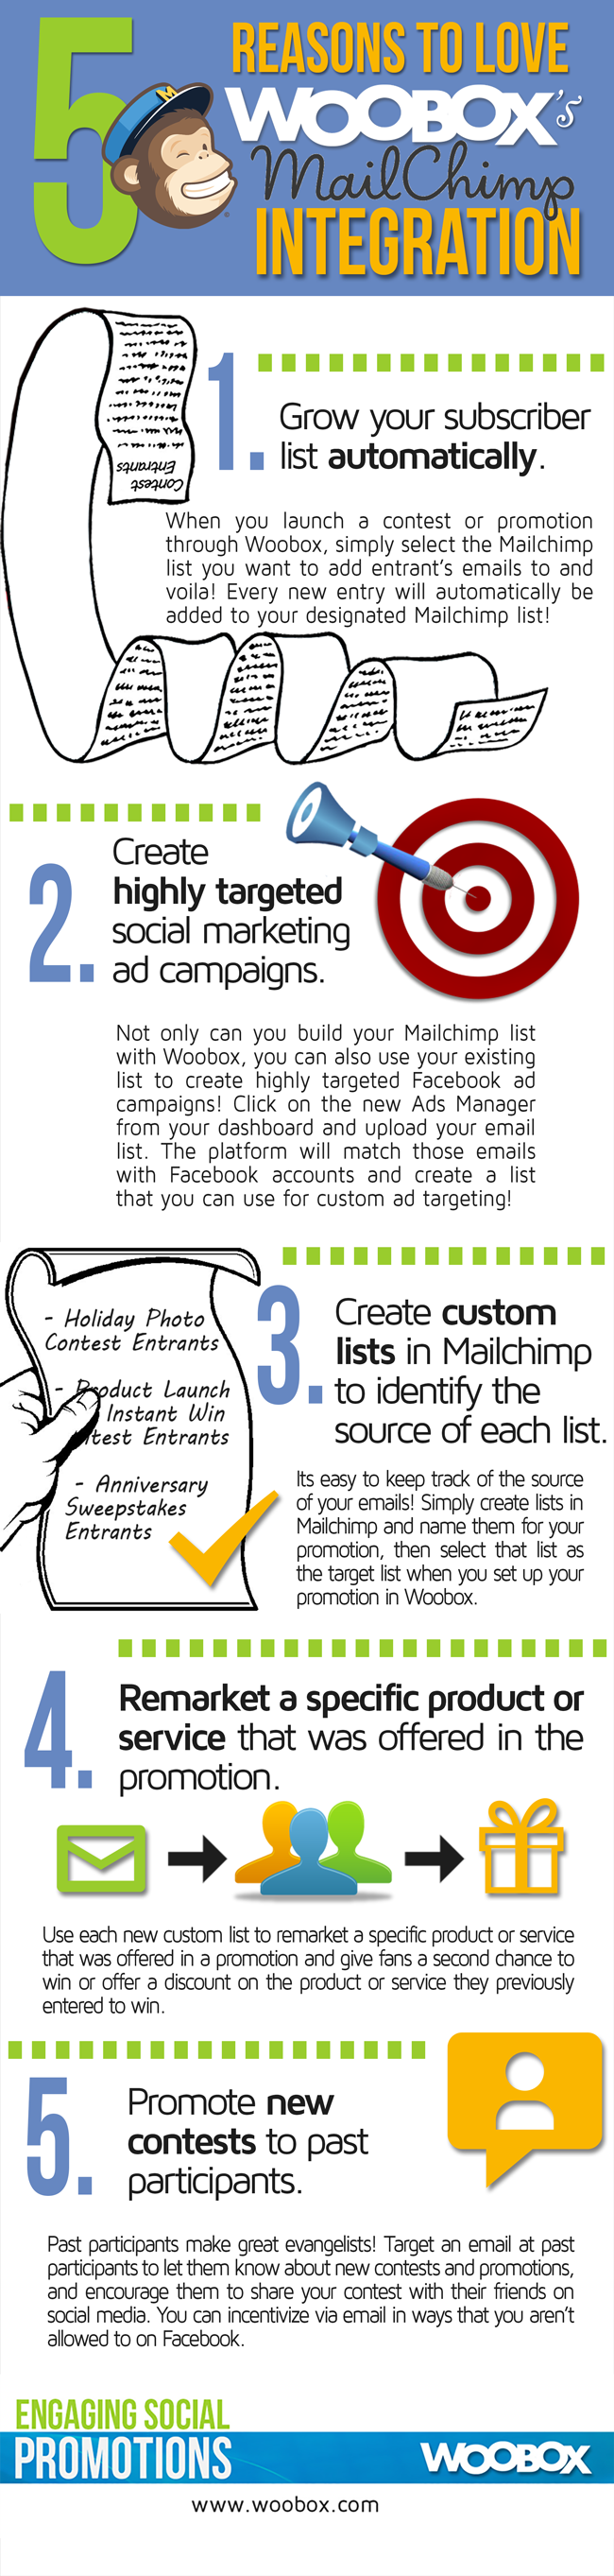 Mailchimp-Integration-Infographic-Size-Fixed1.13.2014